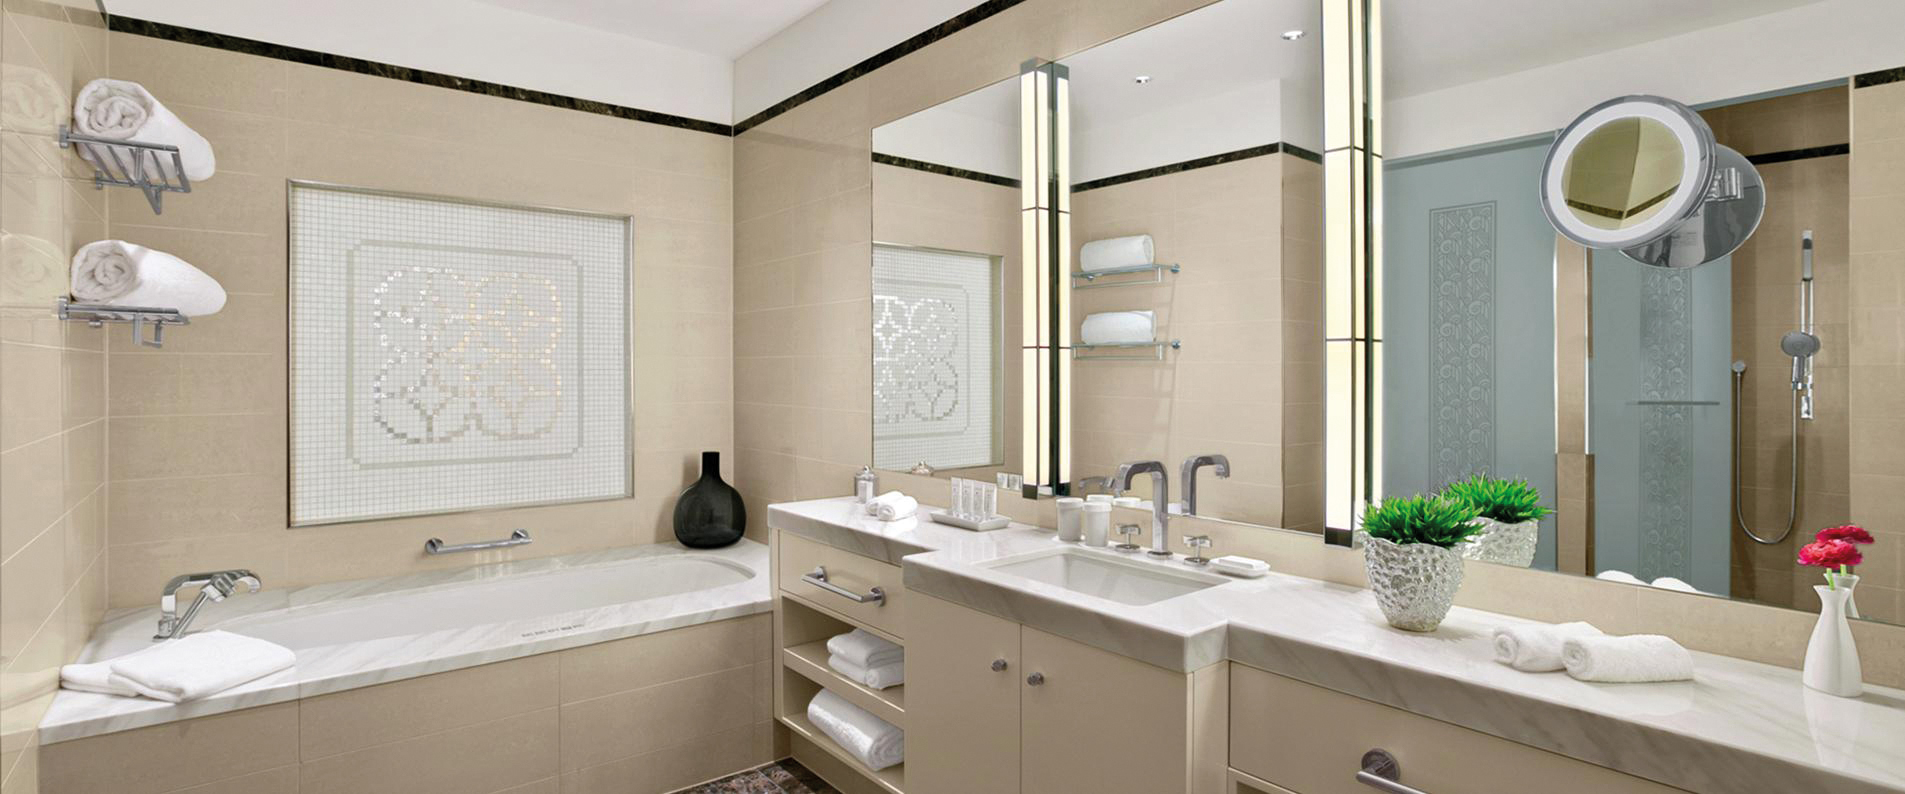 Hotel Bathroom Accessories / Hotel Cosmetic Mirrors / Accessible Bathrooms for Hotels